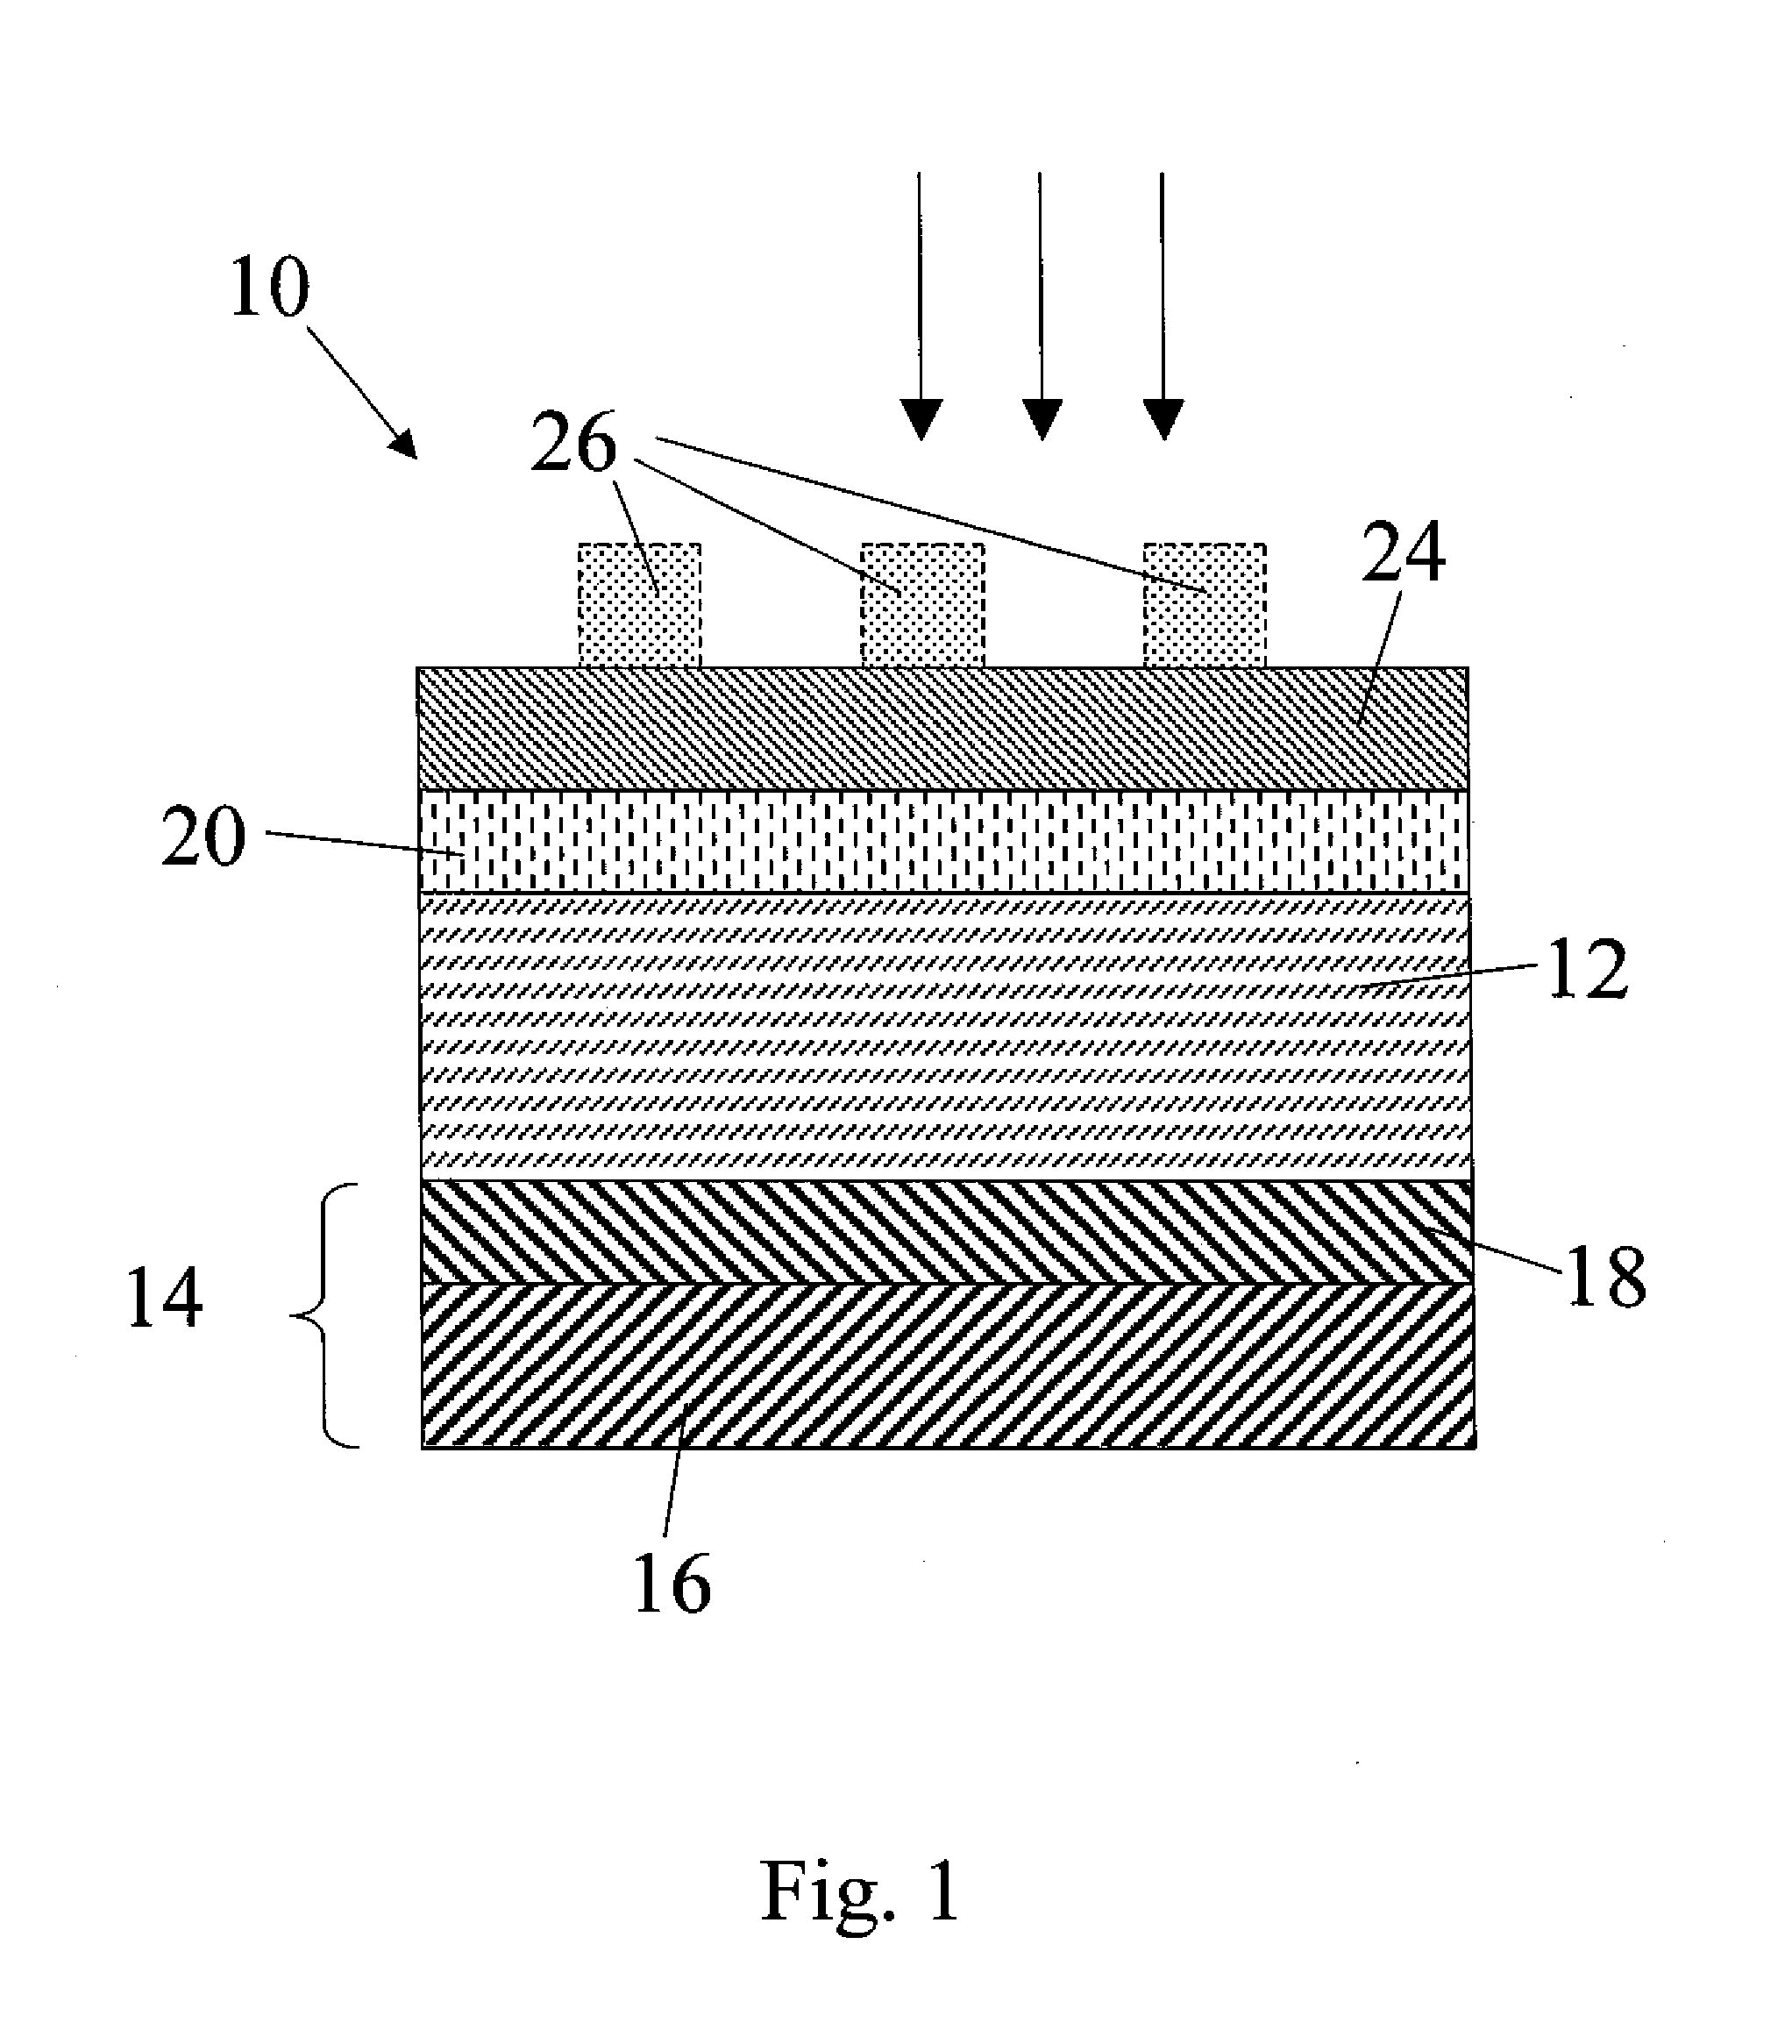 Group iib/va semiconductors suitable for use in photovoltaic devices